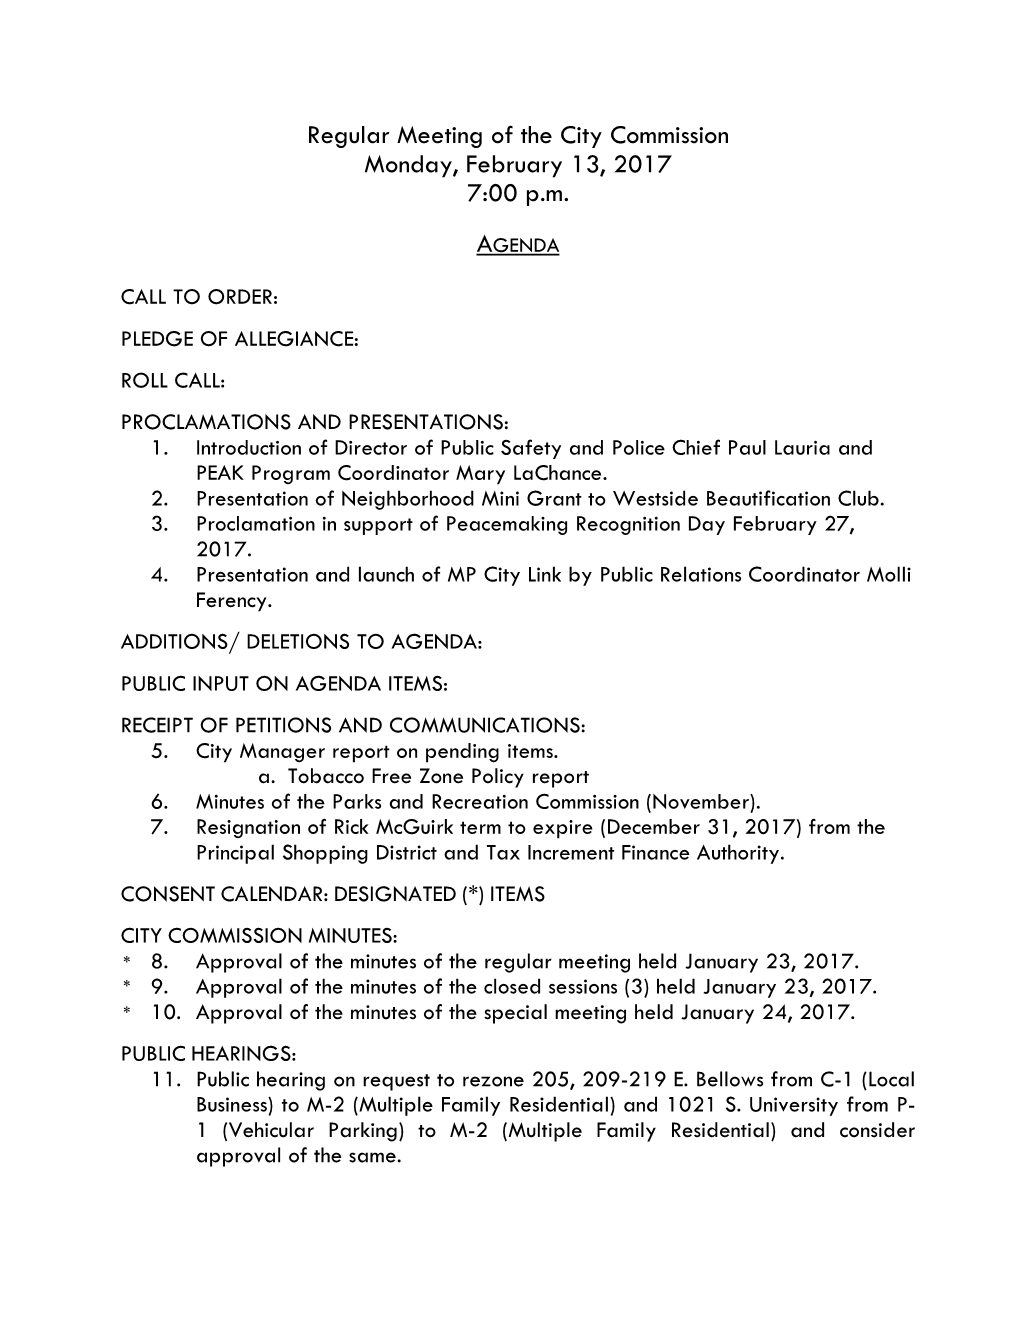 Regular Meeting of the City Commission Monday, February 13, 2017 7:00 P.M